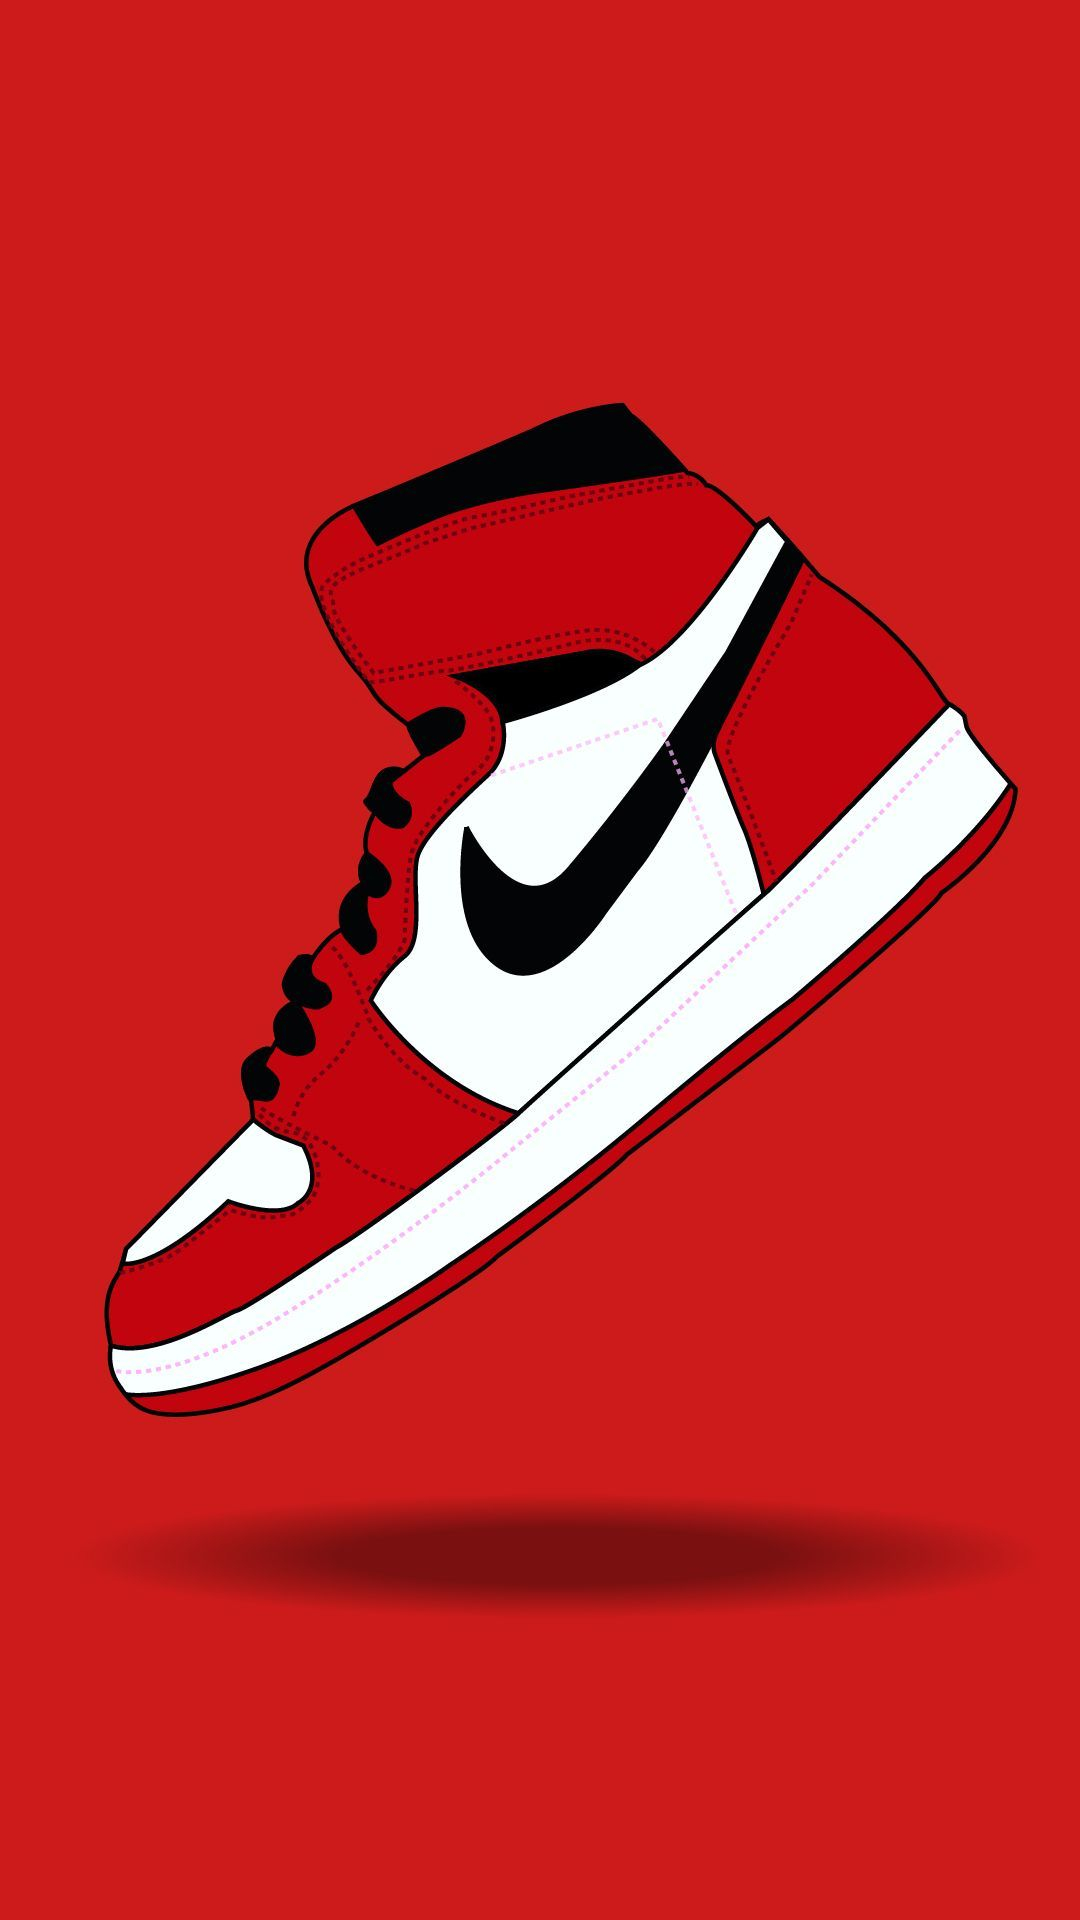 1080x1920 Nike Air Force 1 Iphone Wallpaper Online, 52% OFF